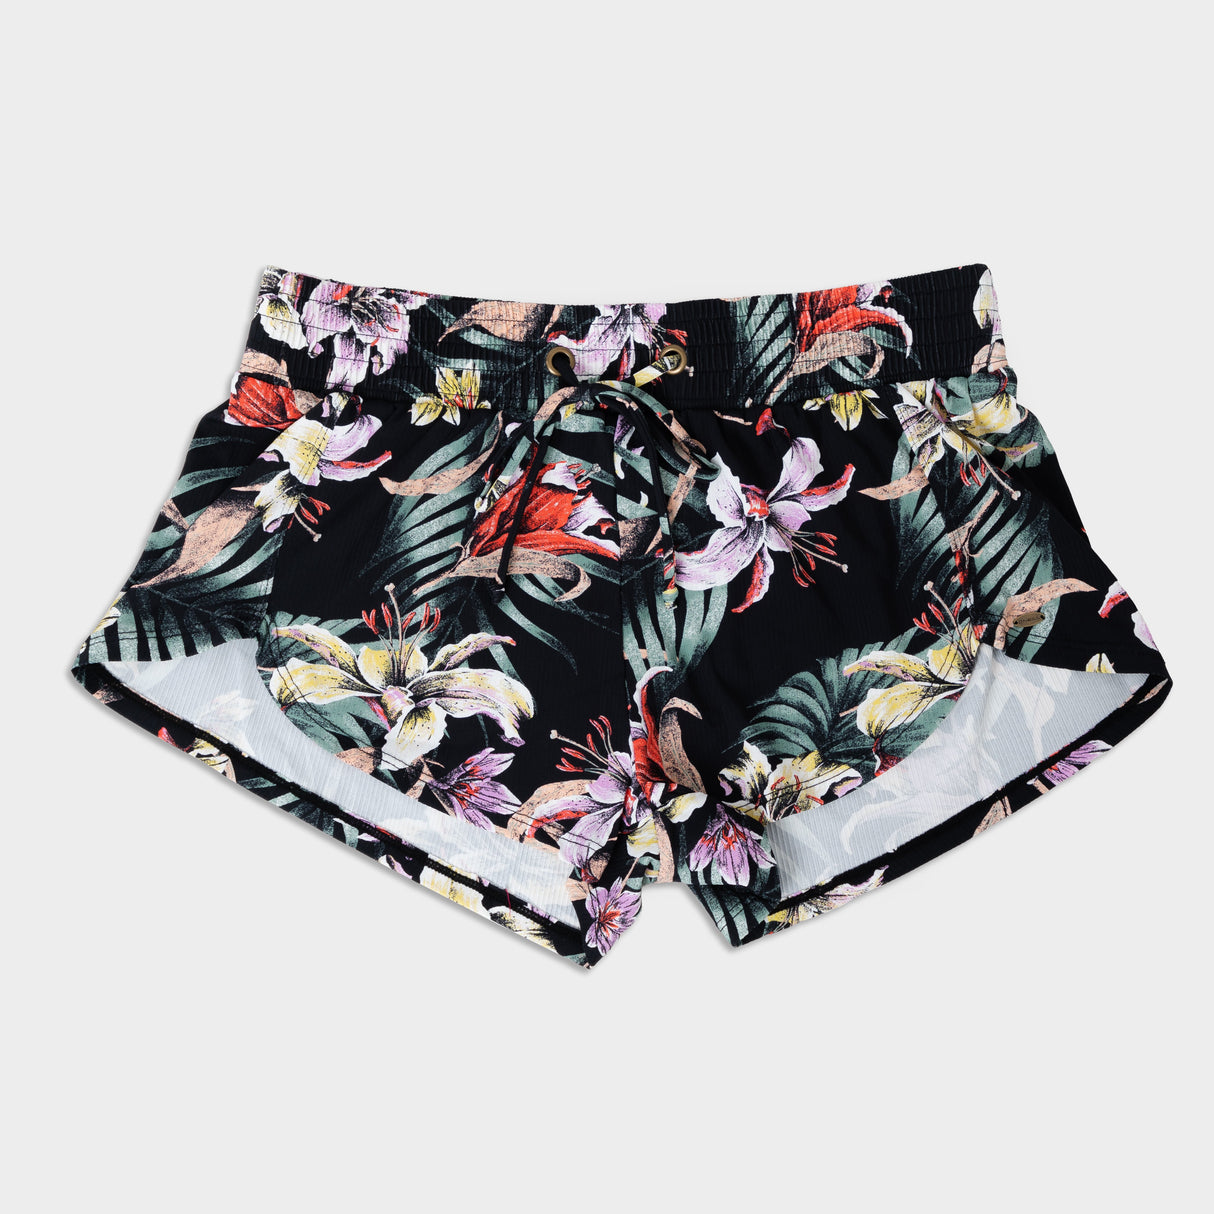 ROPA MUJER - TROPICAL BLACK FLOWER